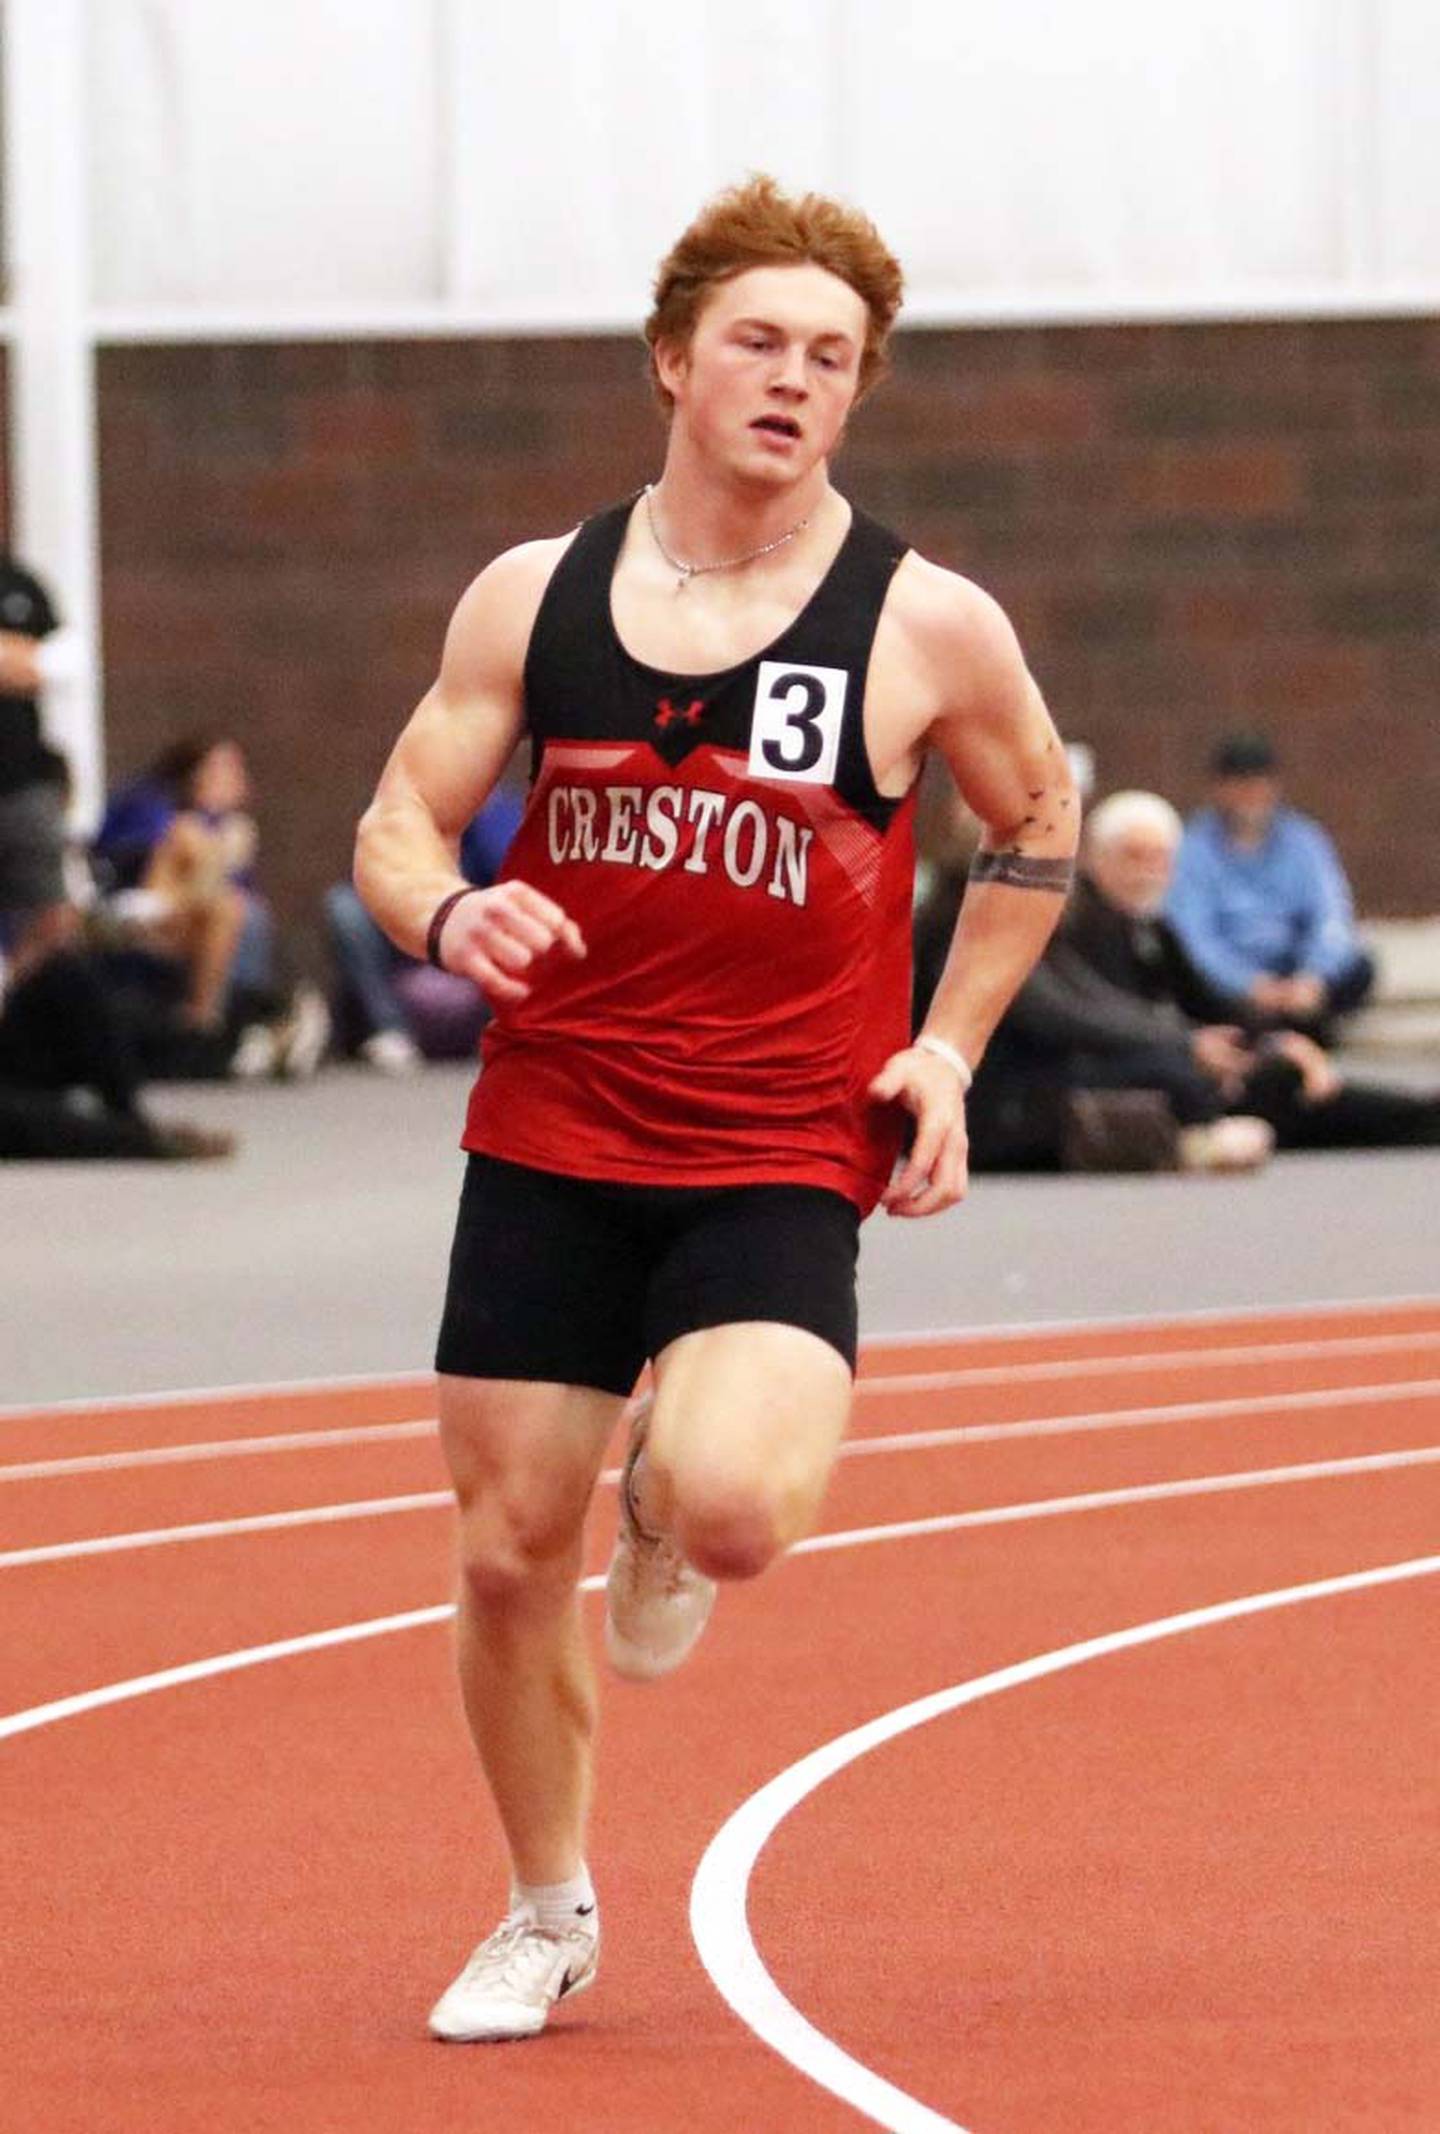 Weston Trapp of Creston runs in the 400m dash where he placed eighth with a time of :56.48